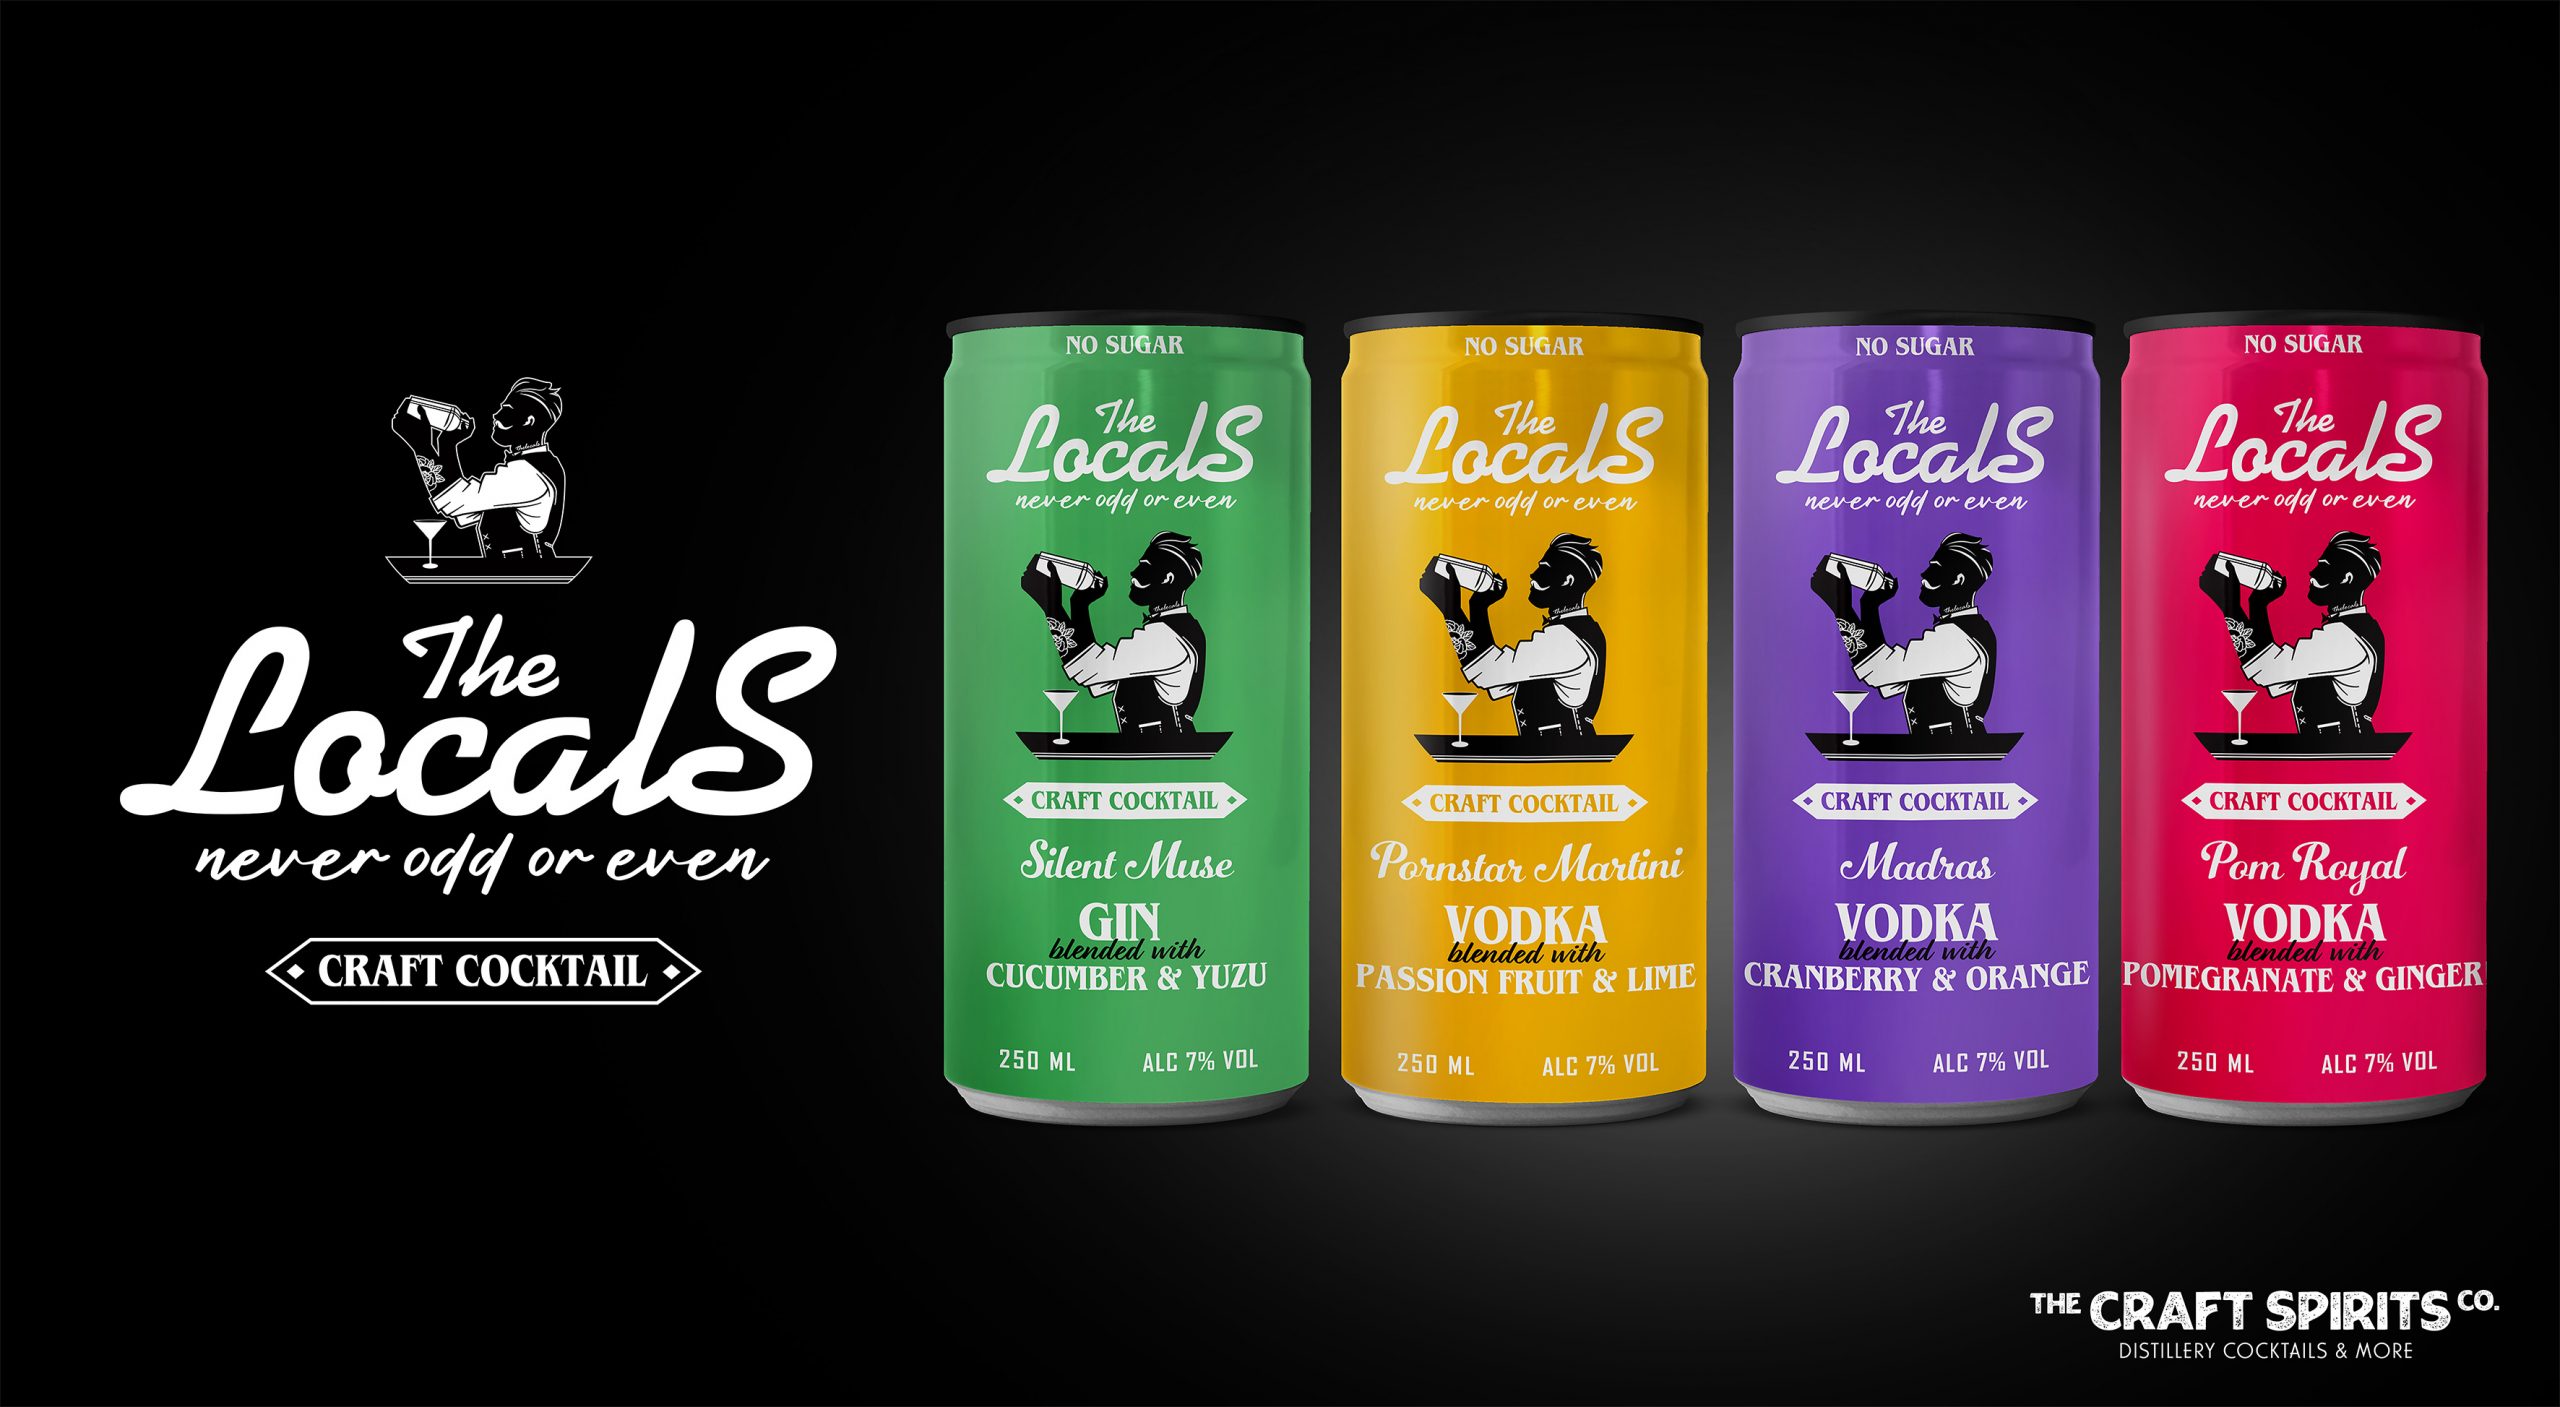 The Locals – The first Greek handmade cocktails in a can